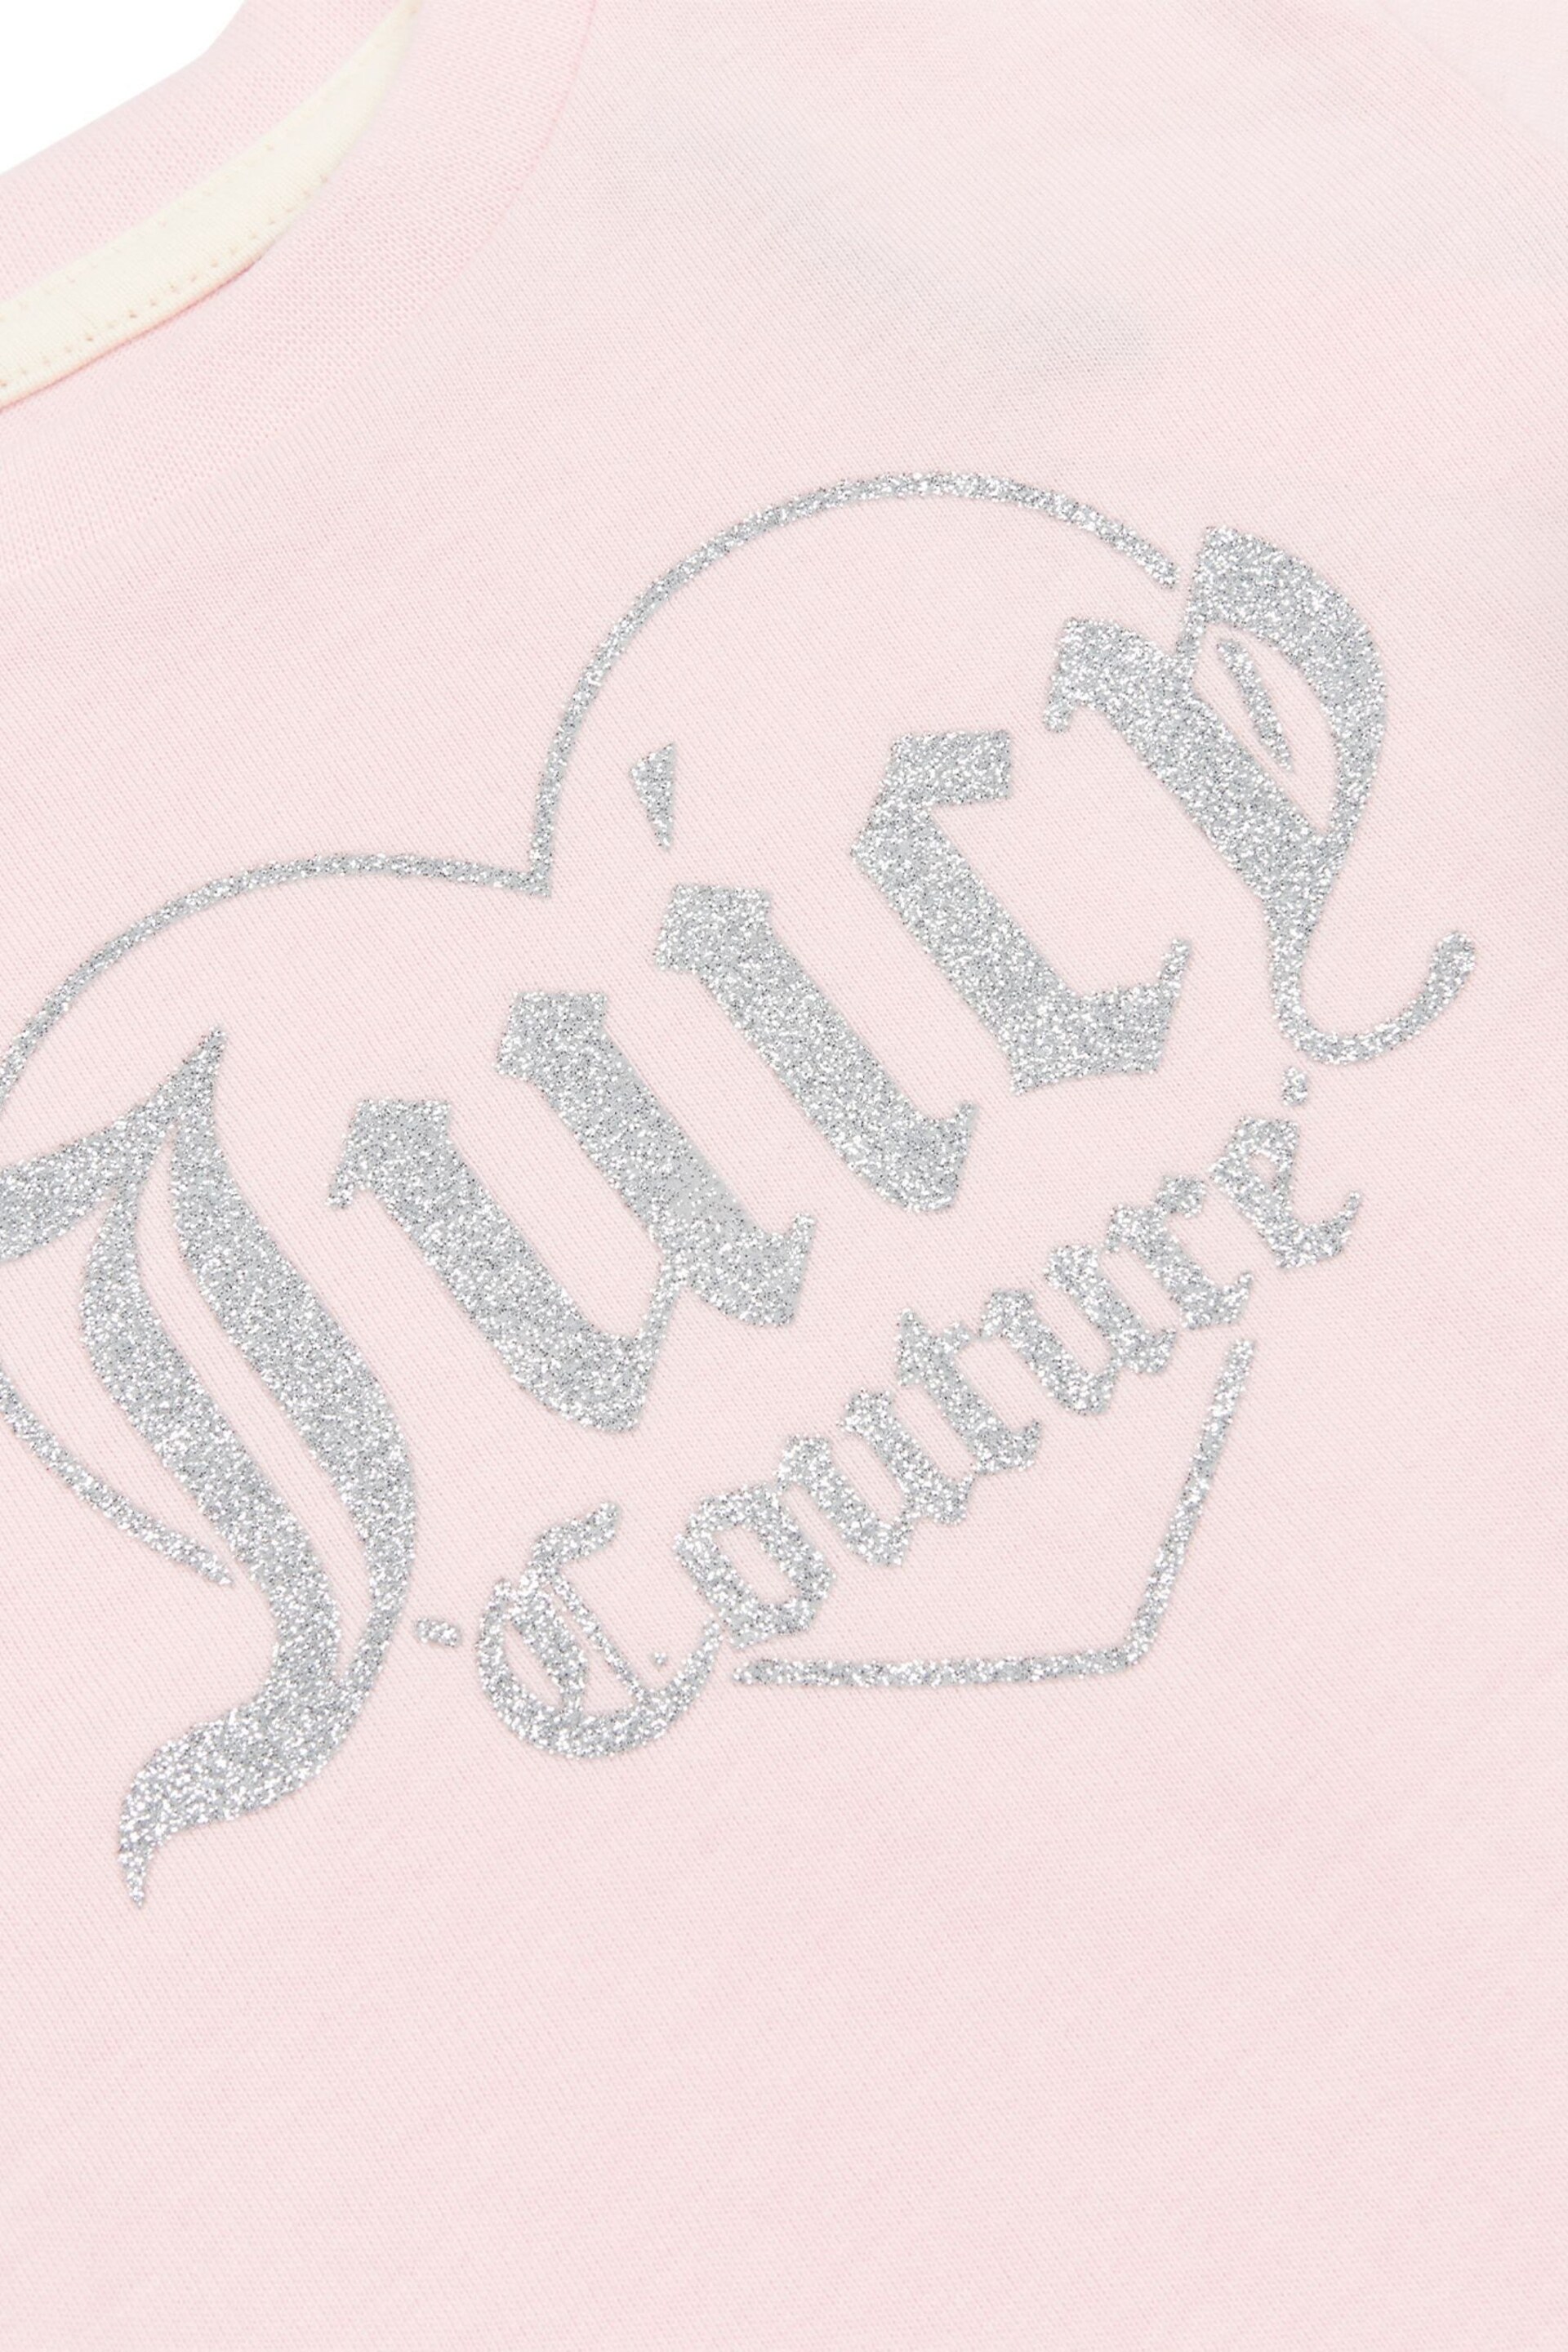 Juicy Couture Girls Pink Print T-Shirt - Image 3 of 3